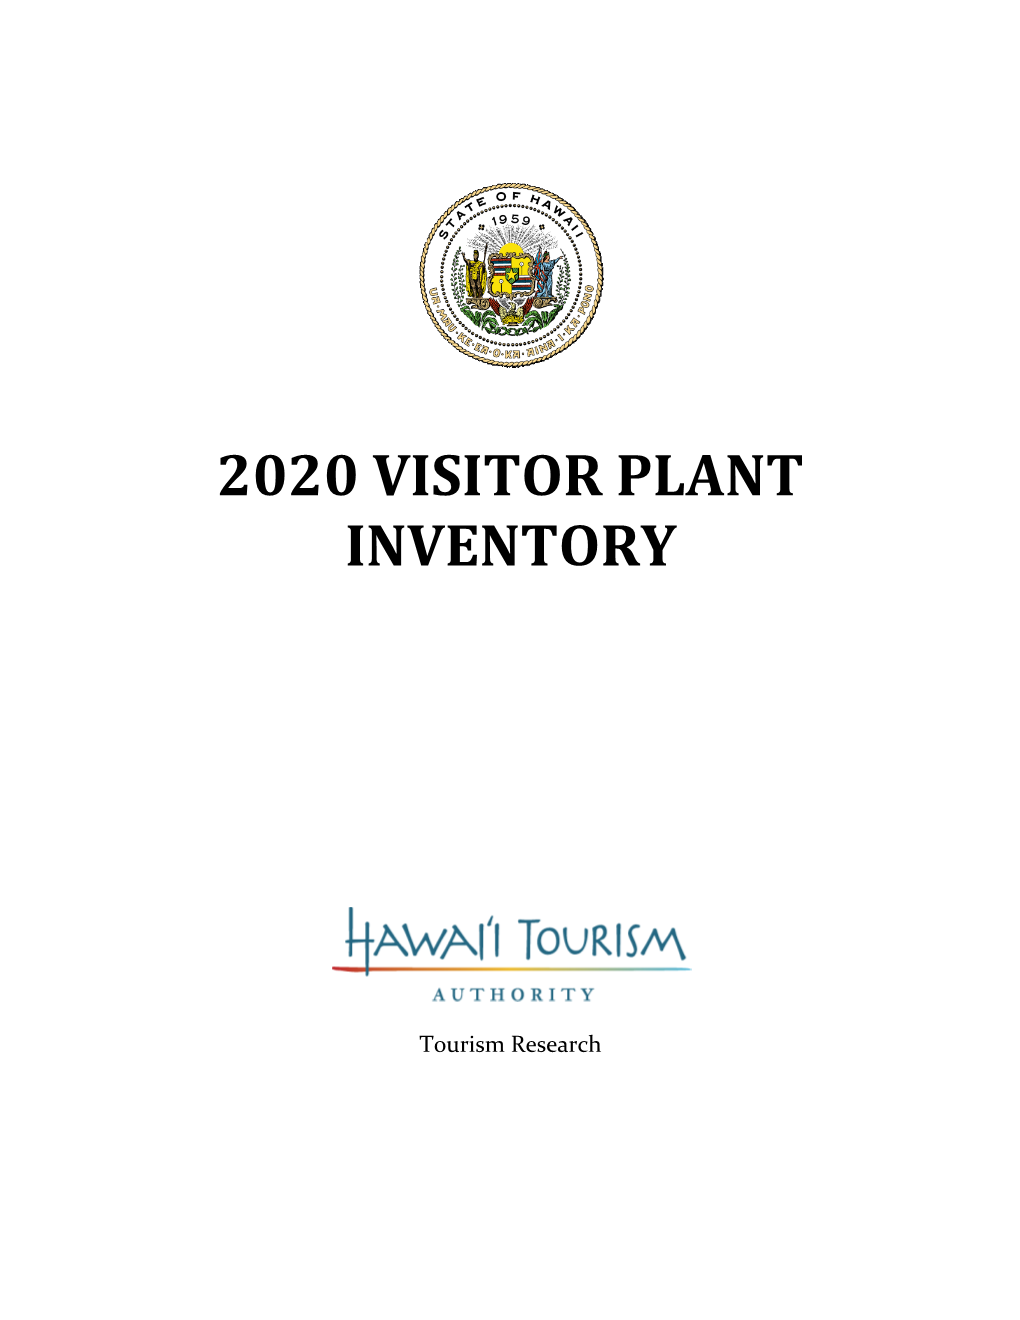 2020 Visitor Plant Inventory